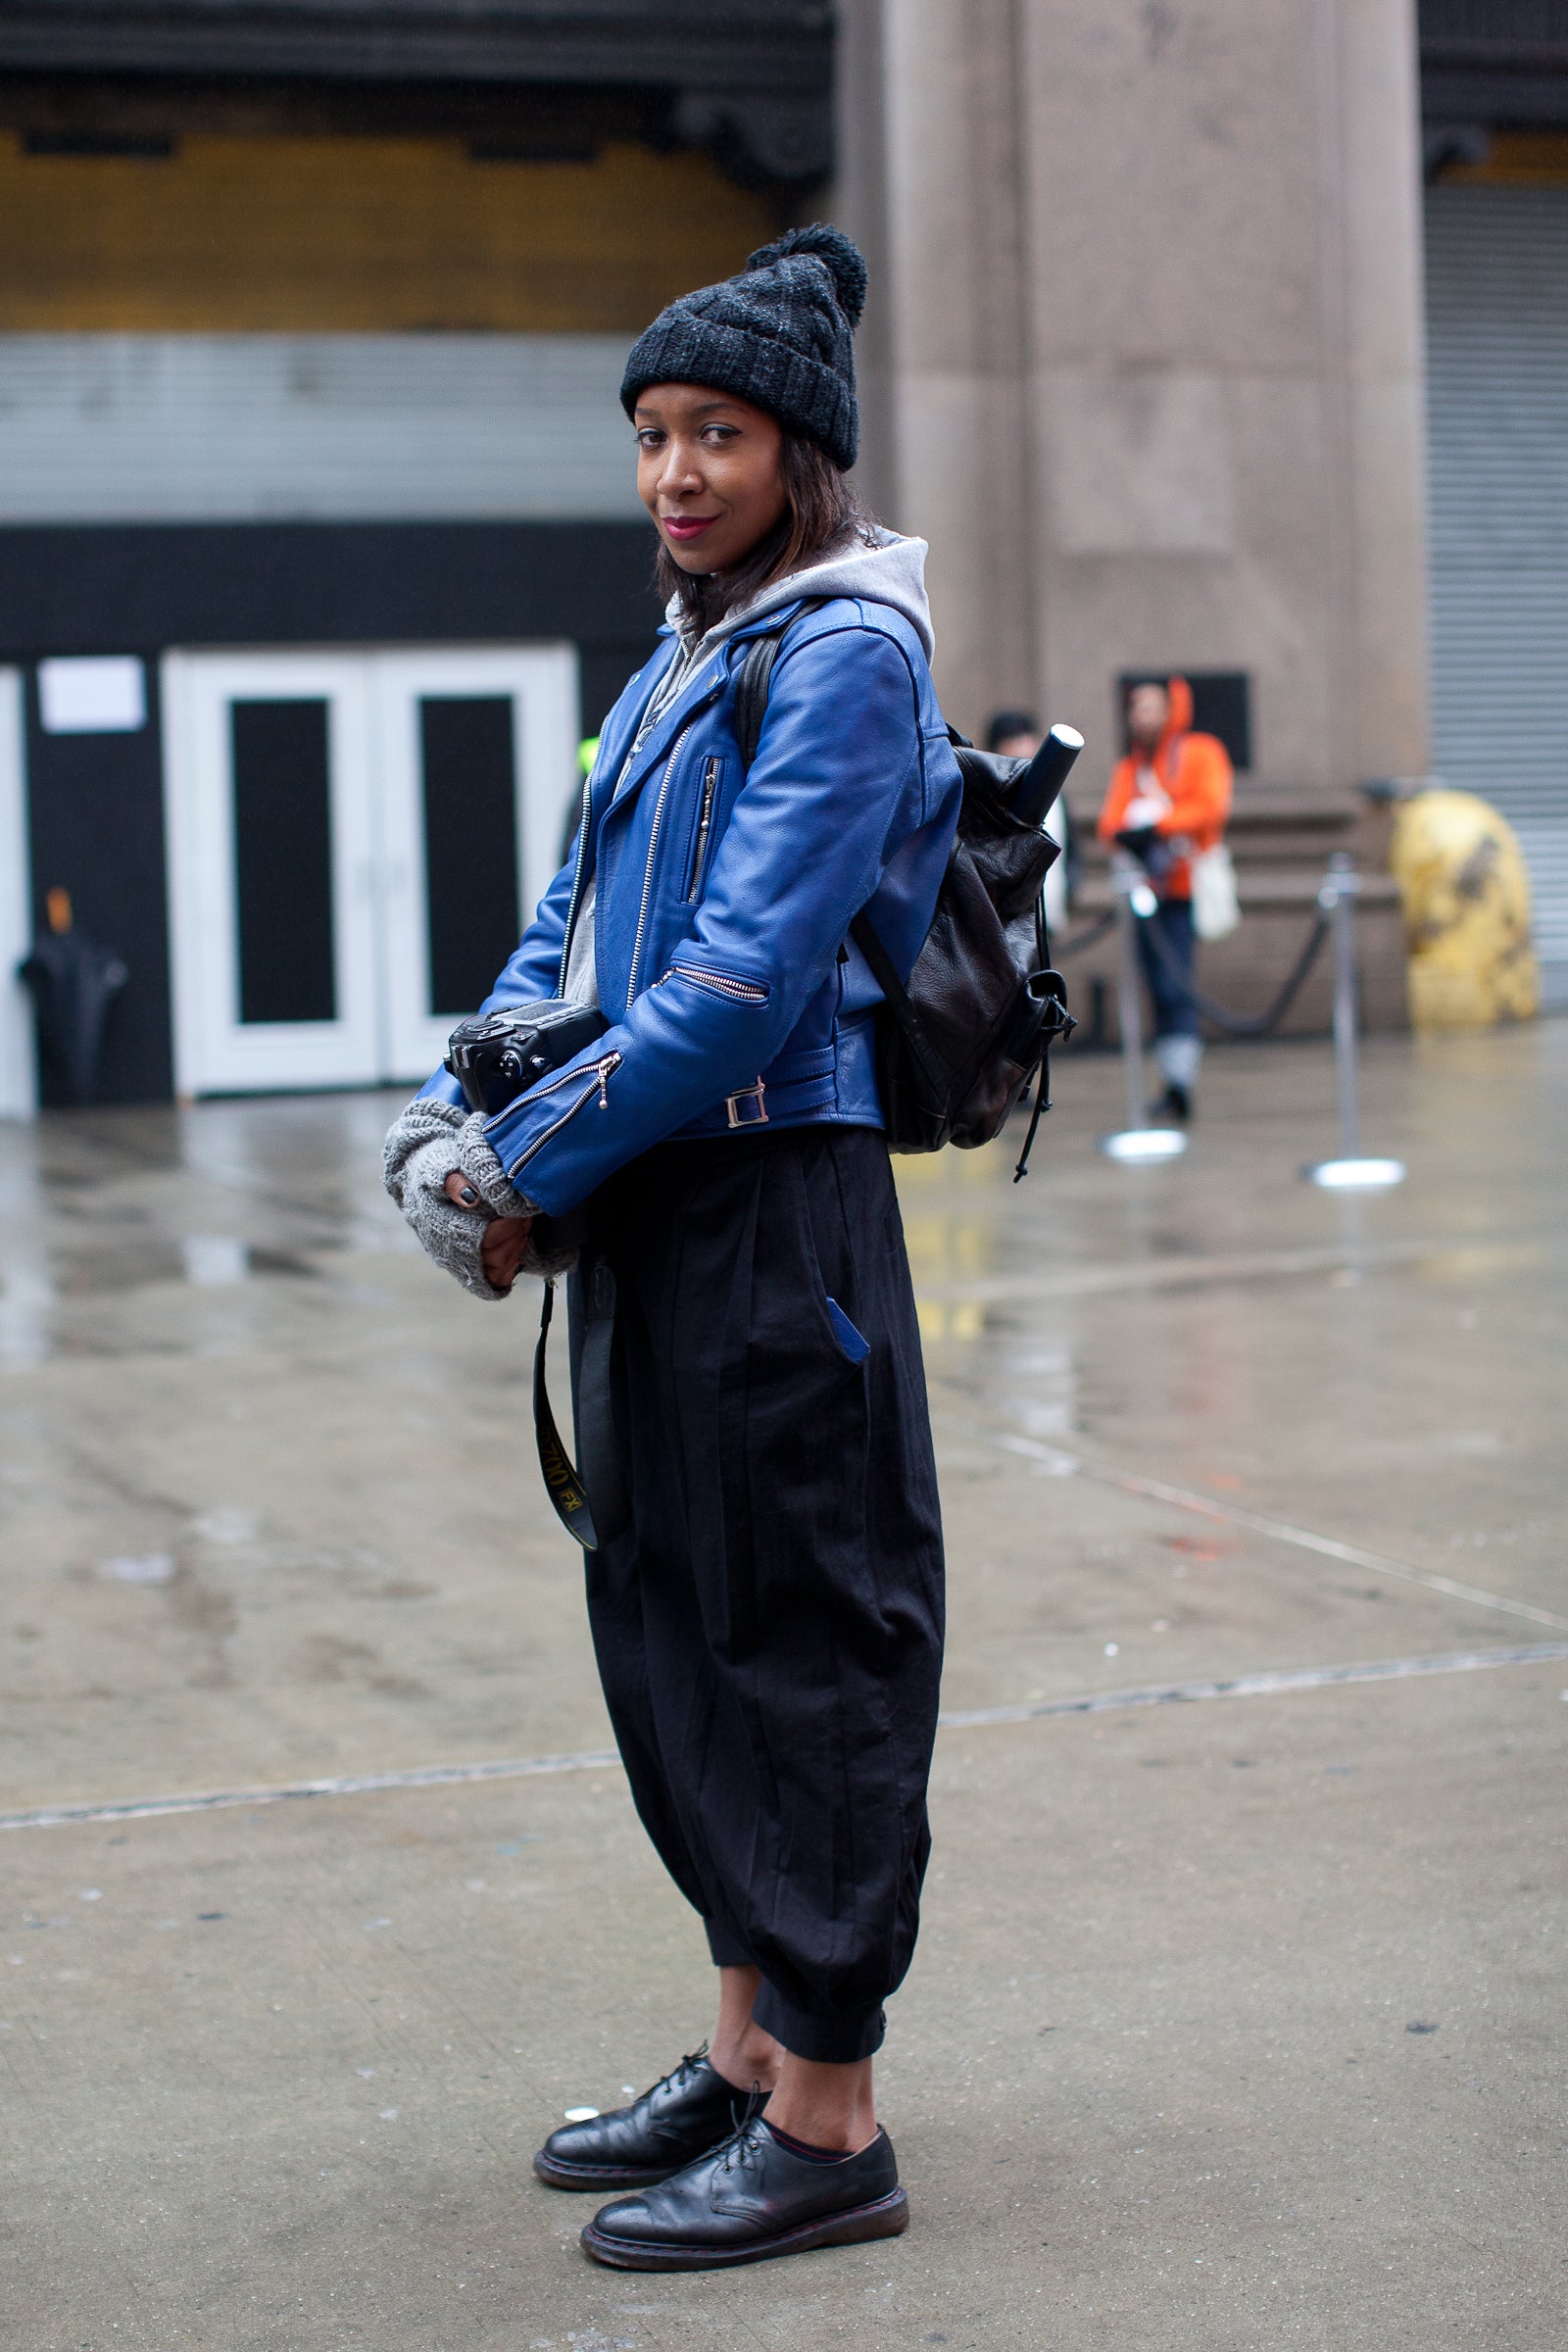 Street Style: Bold Moves